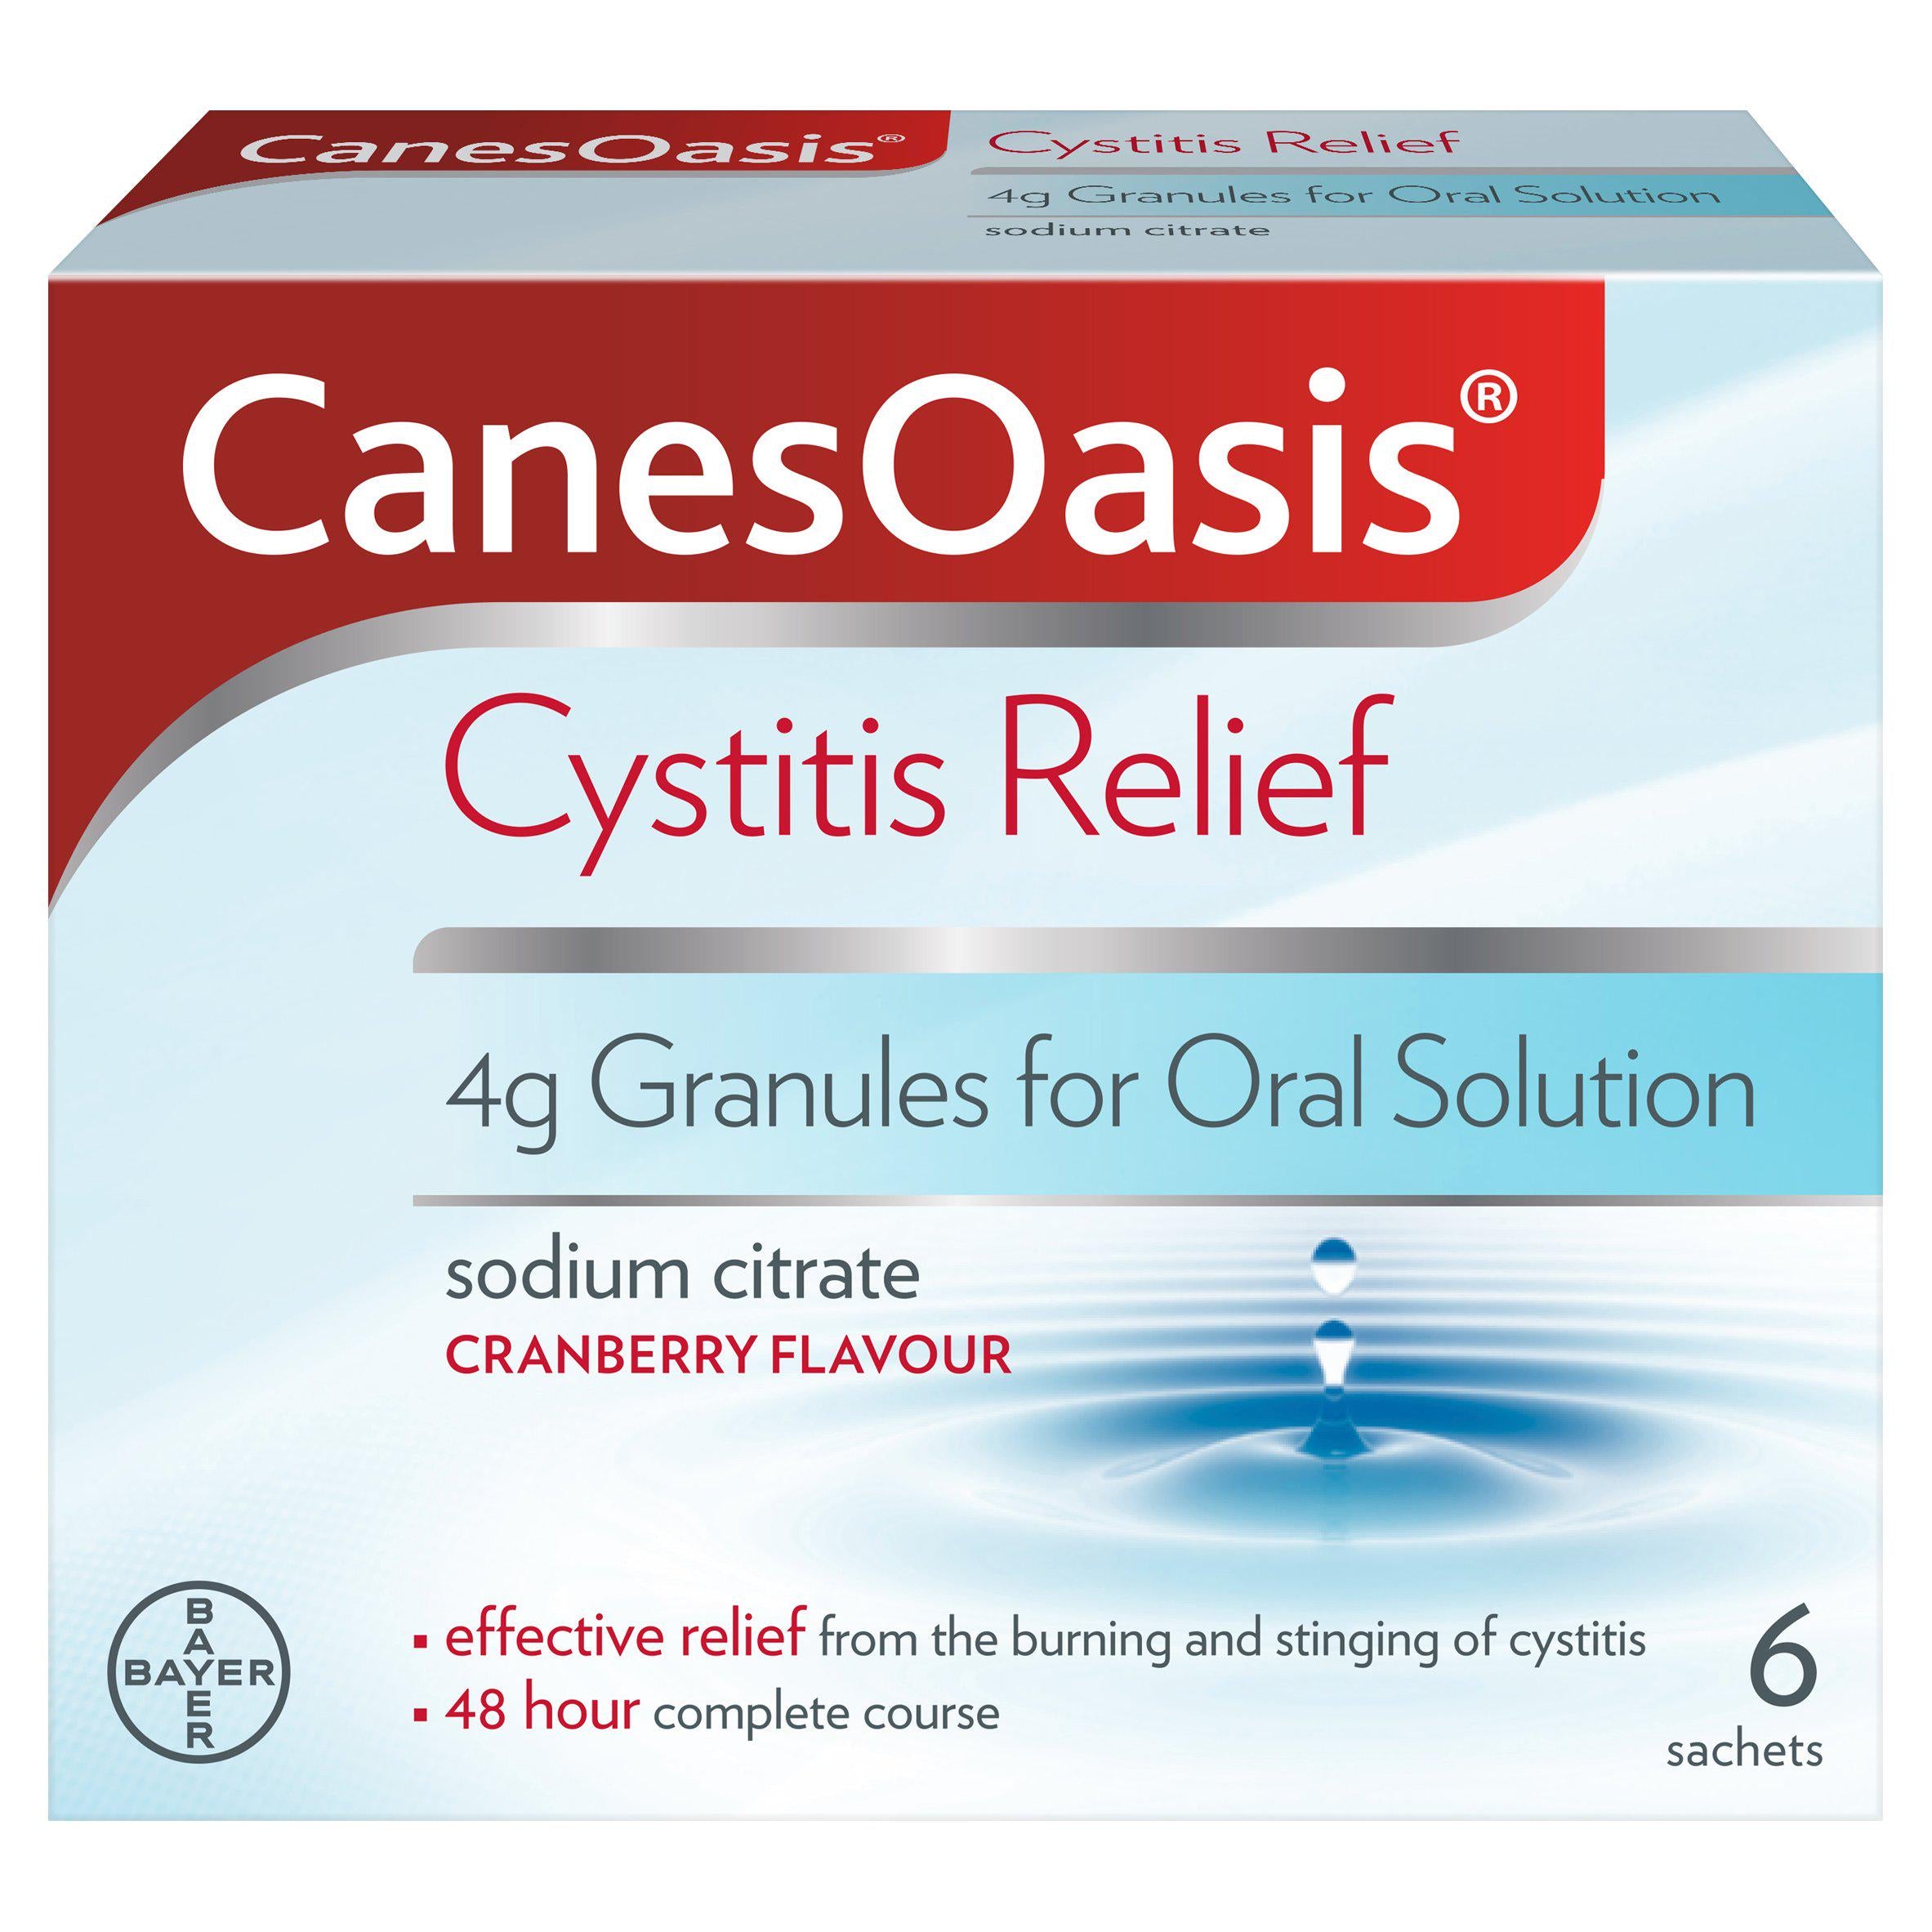 CanesOasis Cystitis Relief 4g Granules for Oral Solution Cranberry Flavour x6 women's health & pregnancy Sainsburys   